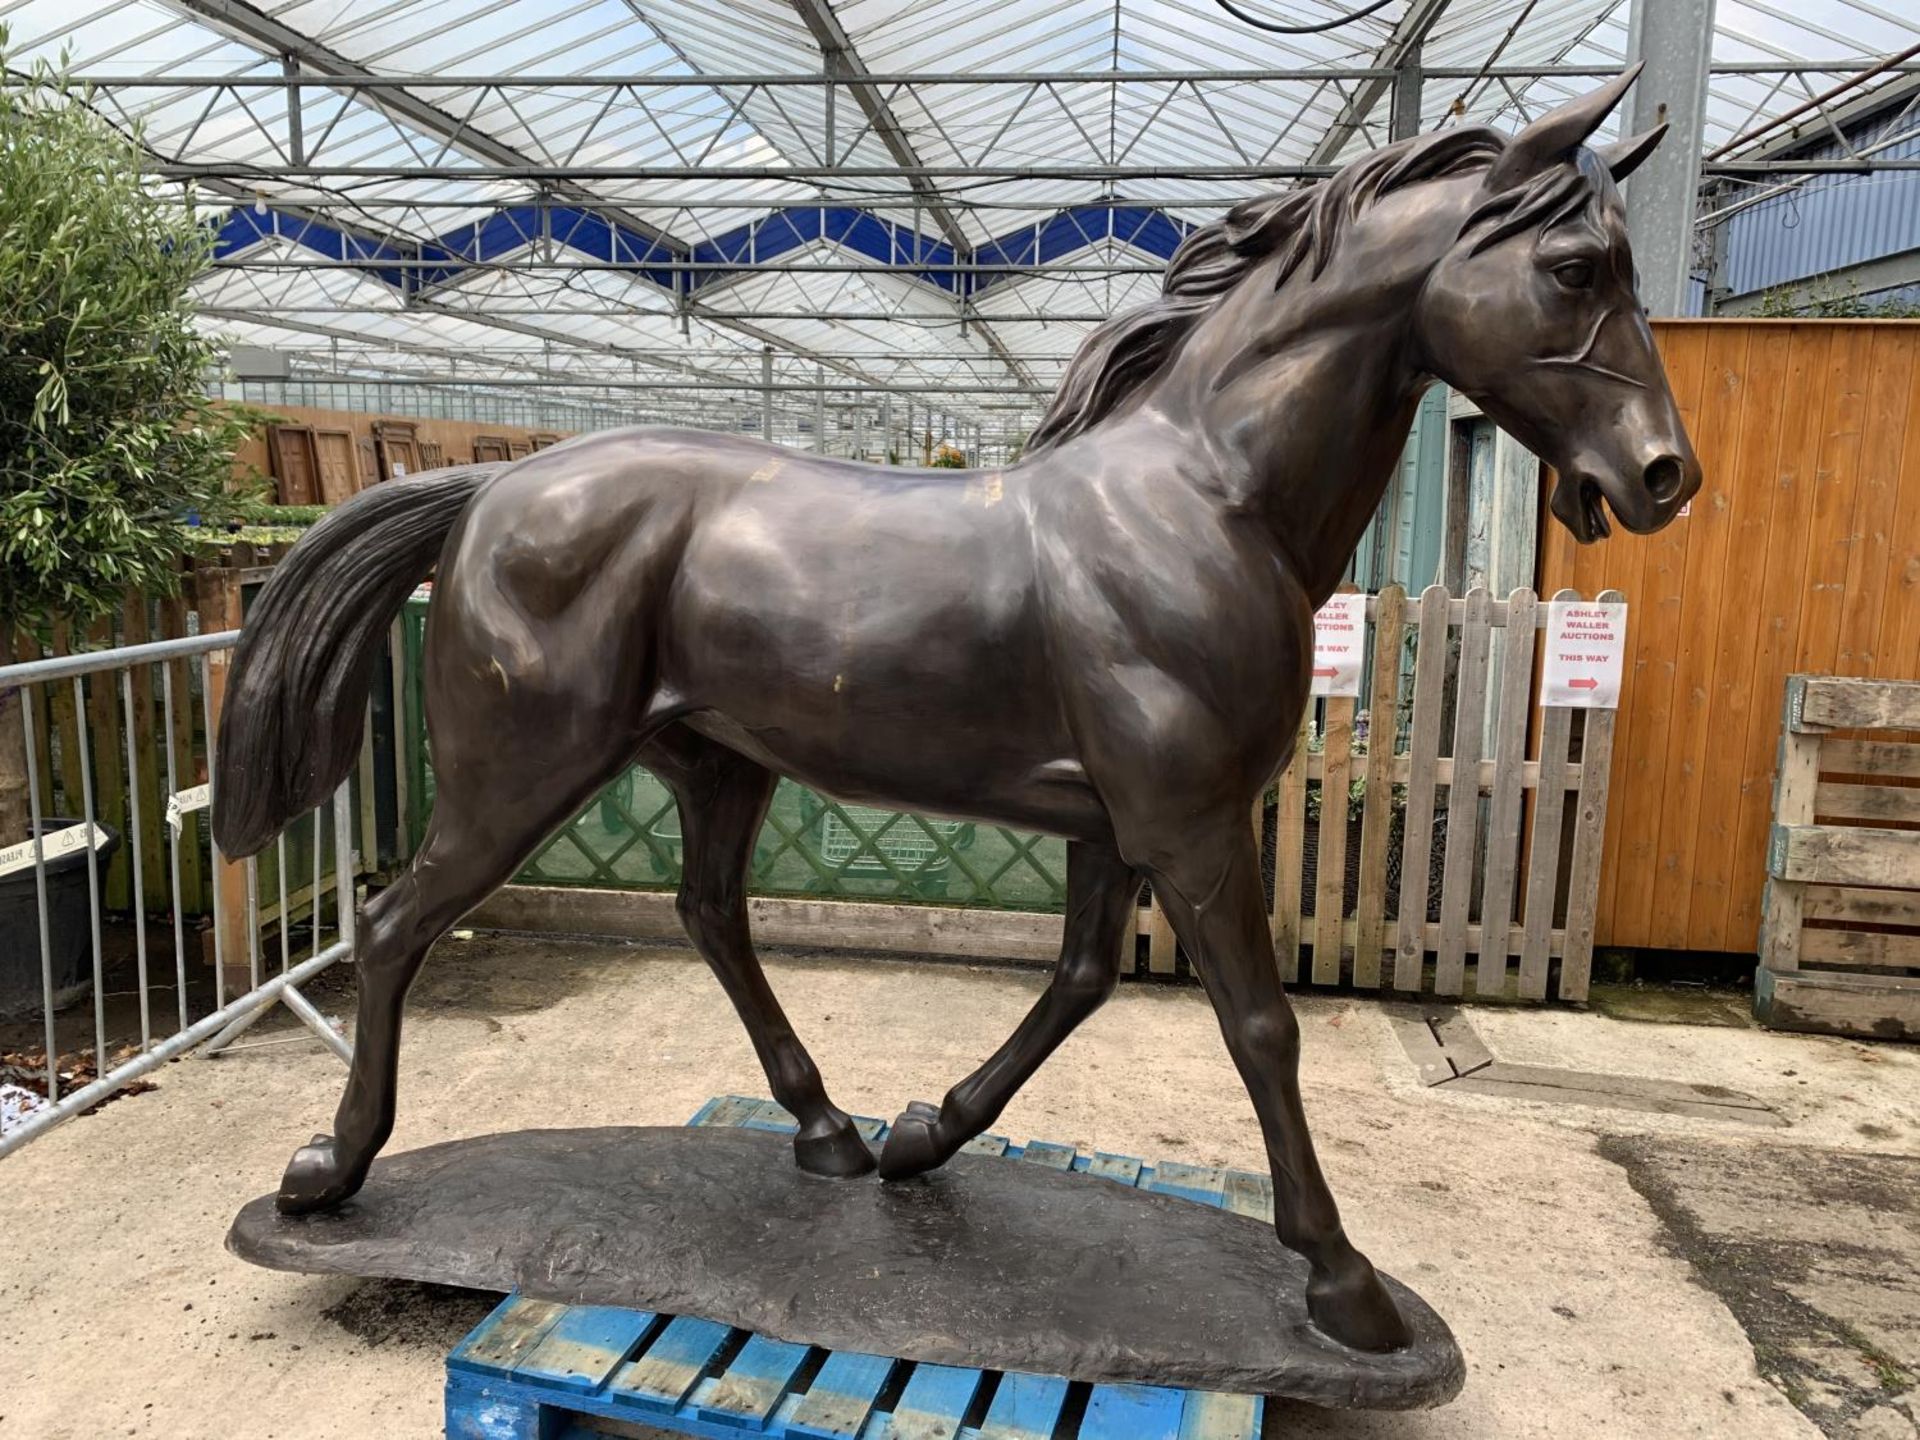 A LIFE-SIZE BRONZE HORSE FIGURE STANDING AT 13 HANDS HIGH